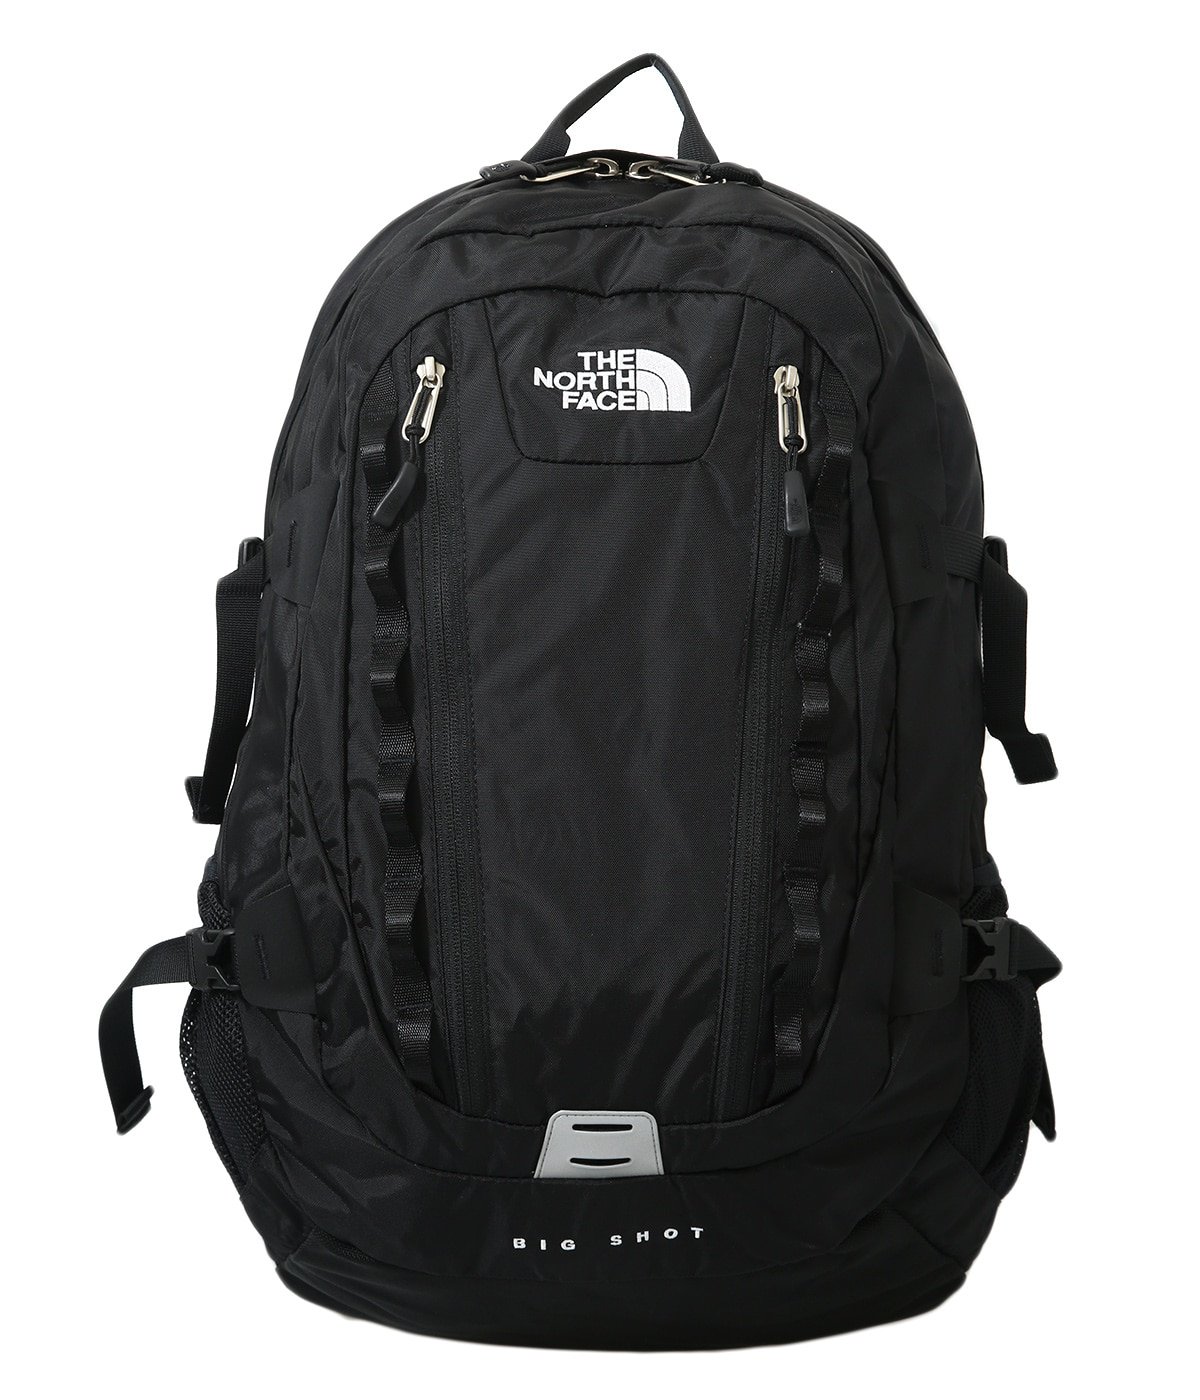 THE NORTH FACE(ザ ノースフェイス) Big Shot CL / バッグ バックパック (メンズ)の通販 -  ARKnets(アークネッツ) 公式通販 【正規取扱店】